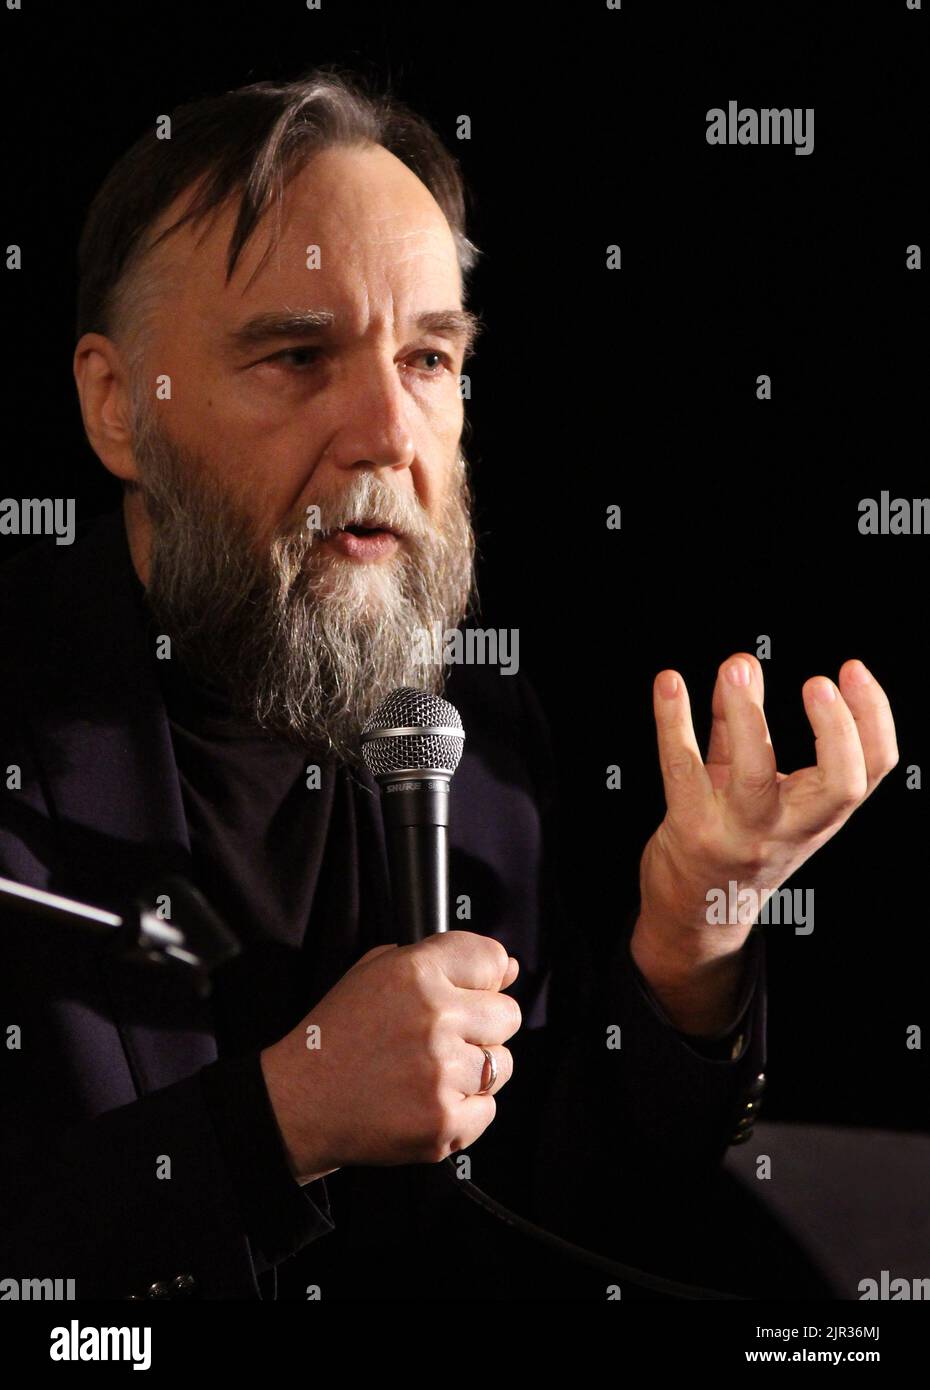 Bucharest, Romania - April 05, 2017: Aleksandr Dugin, Russian political analyst, strategist, writer and philosopher, holds a press conference in Bucha Stock Photo